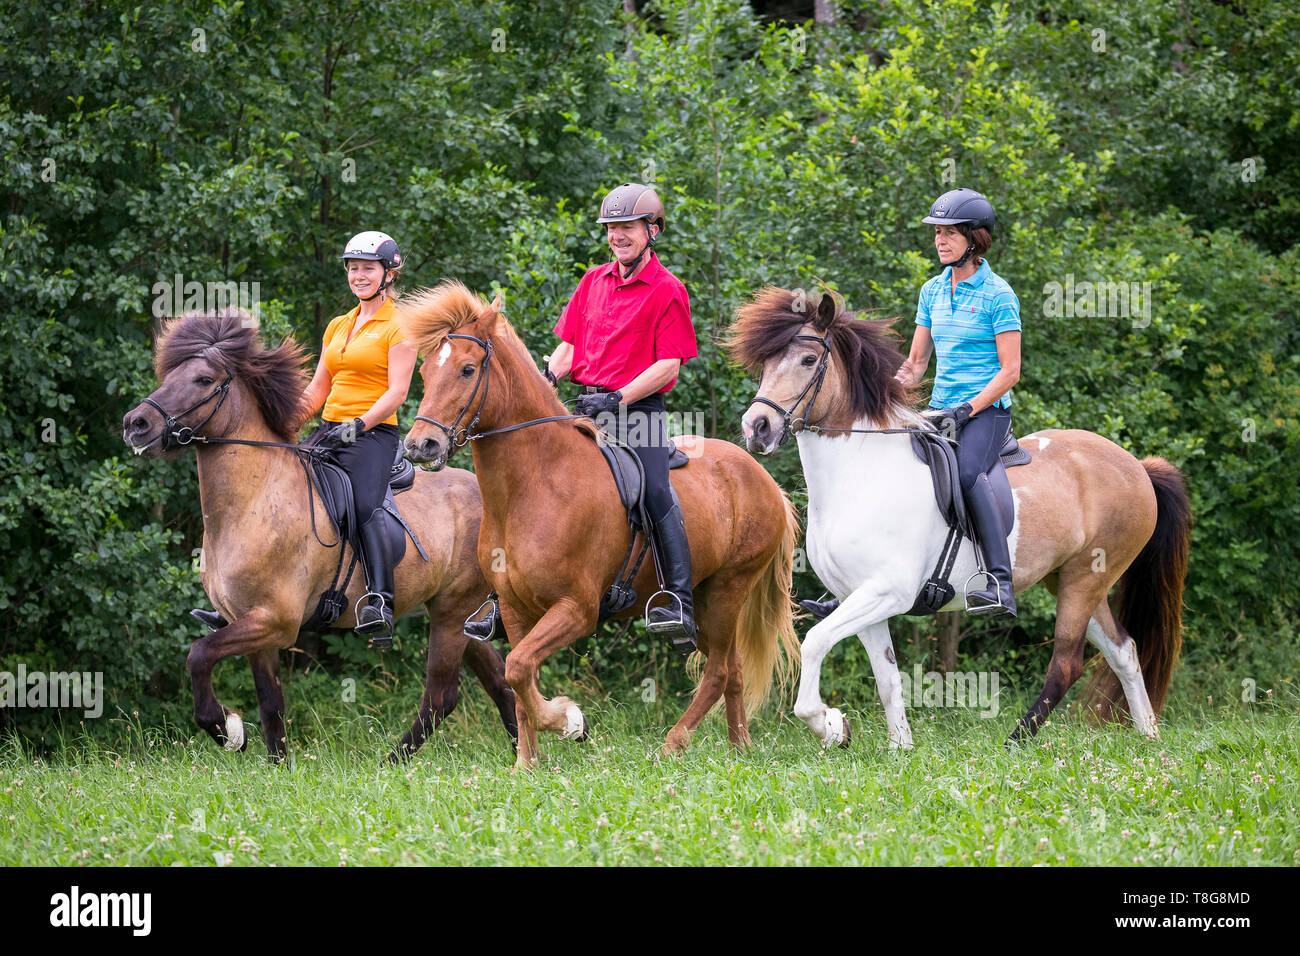 Icelandic Horse. Threehorses ridden by family outdoors in summer. Austria Stock Photo